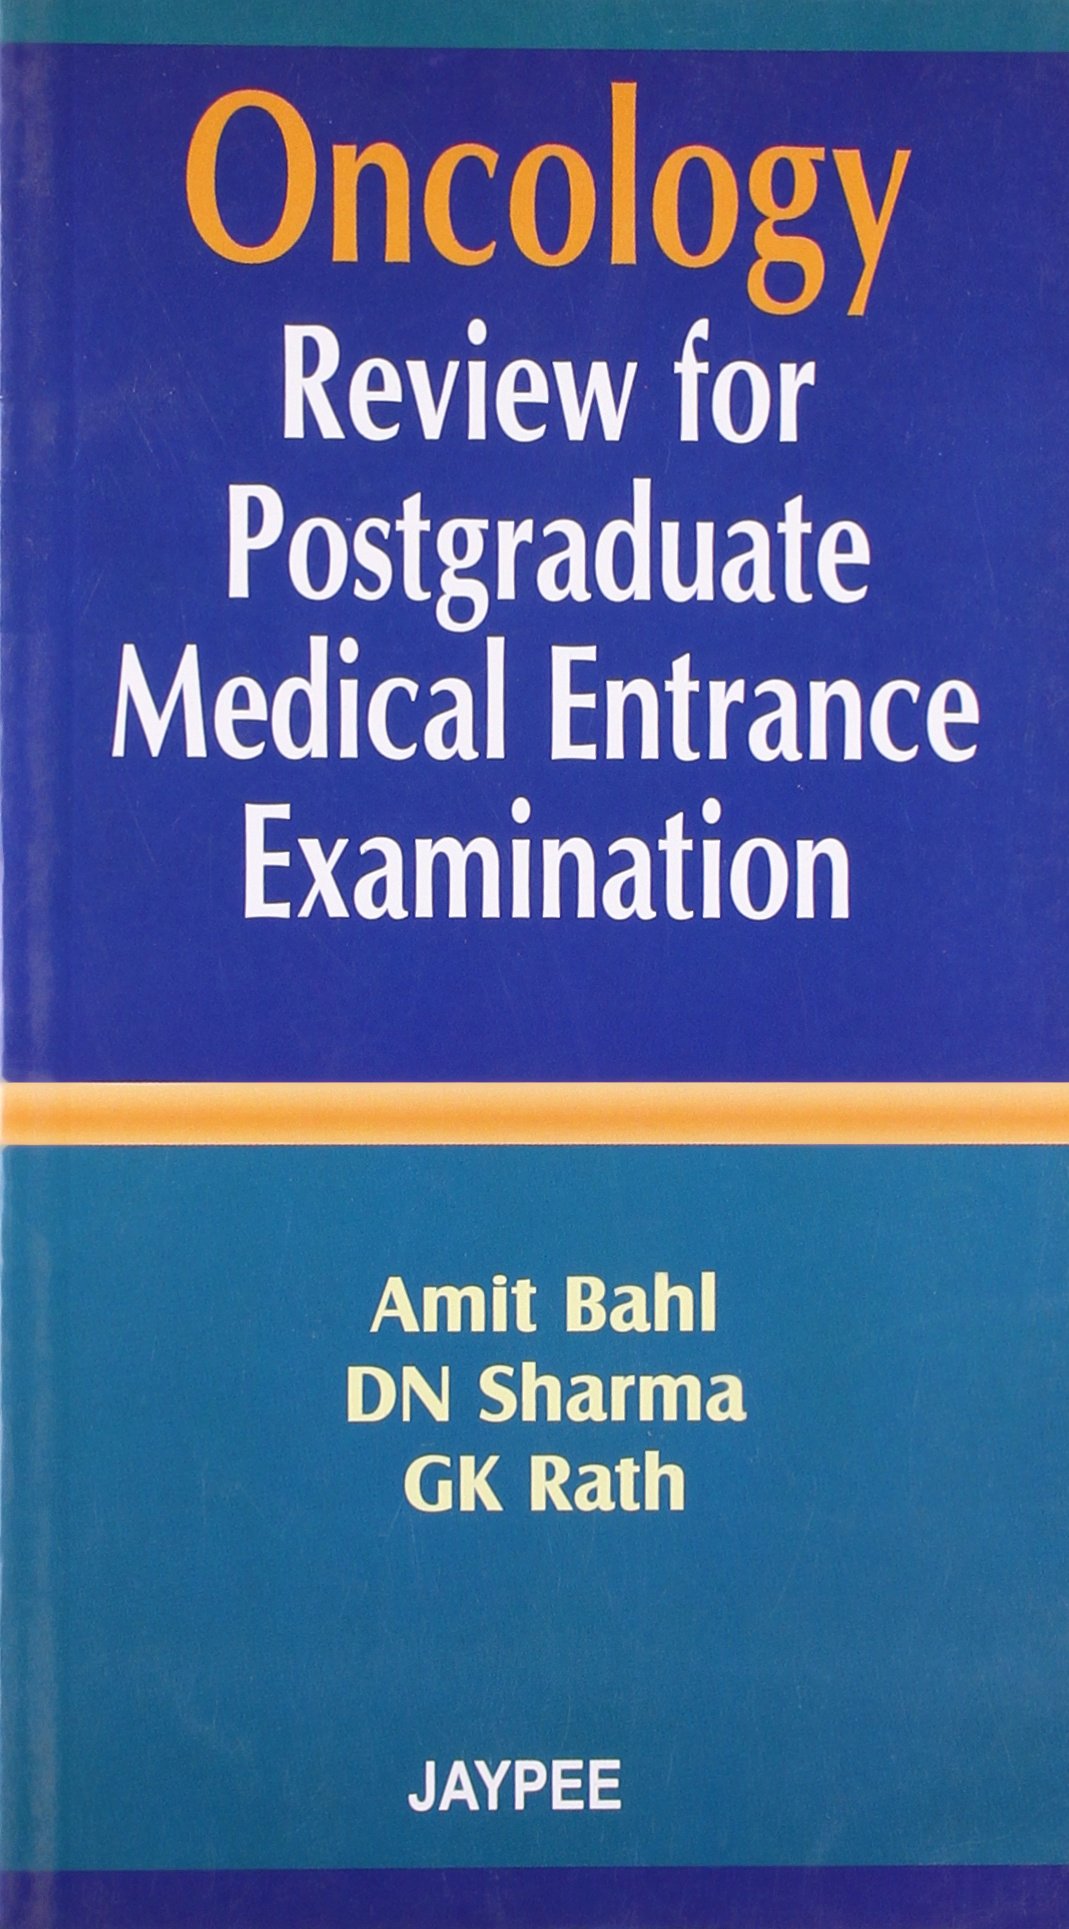 Oncology Review For Postgraduate Medical Entrance Examination